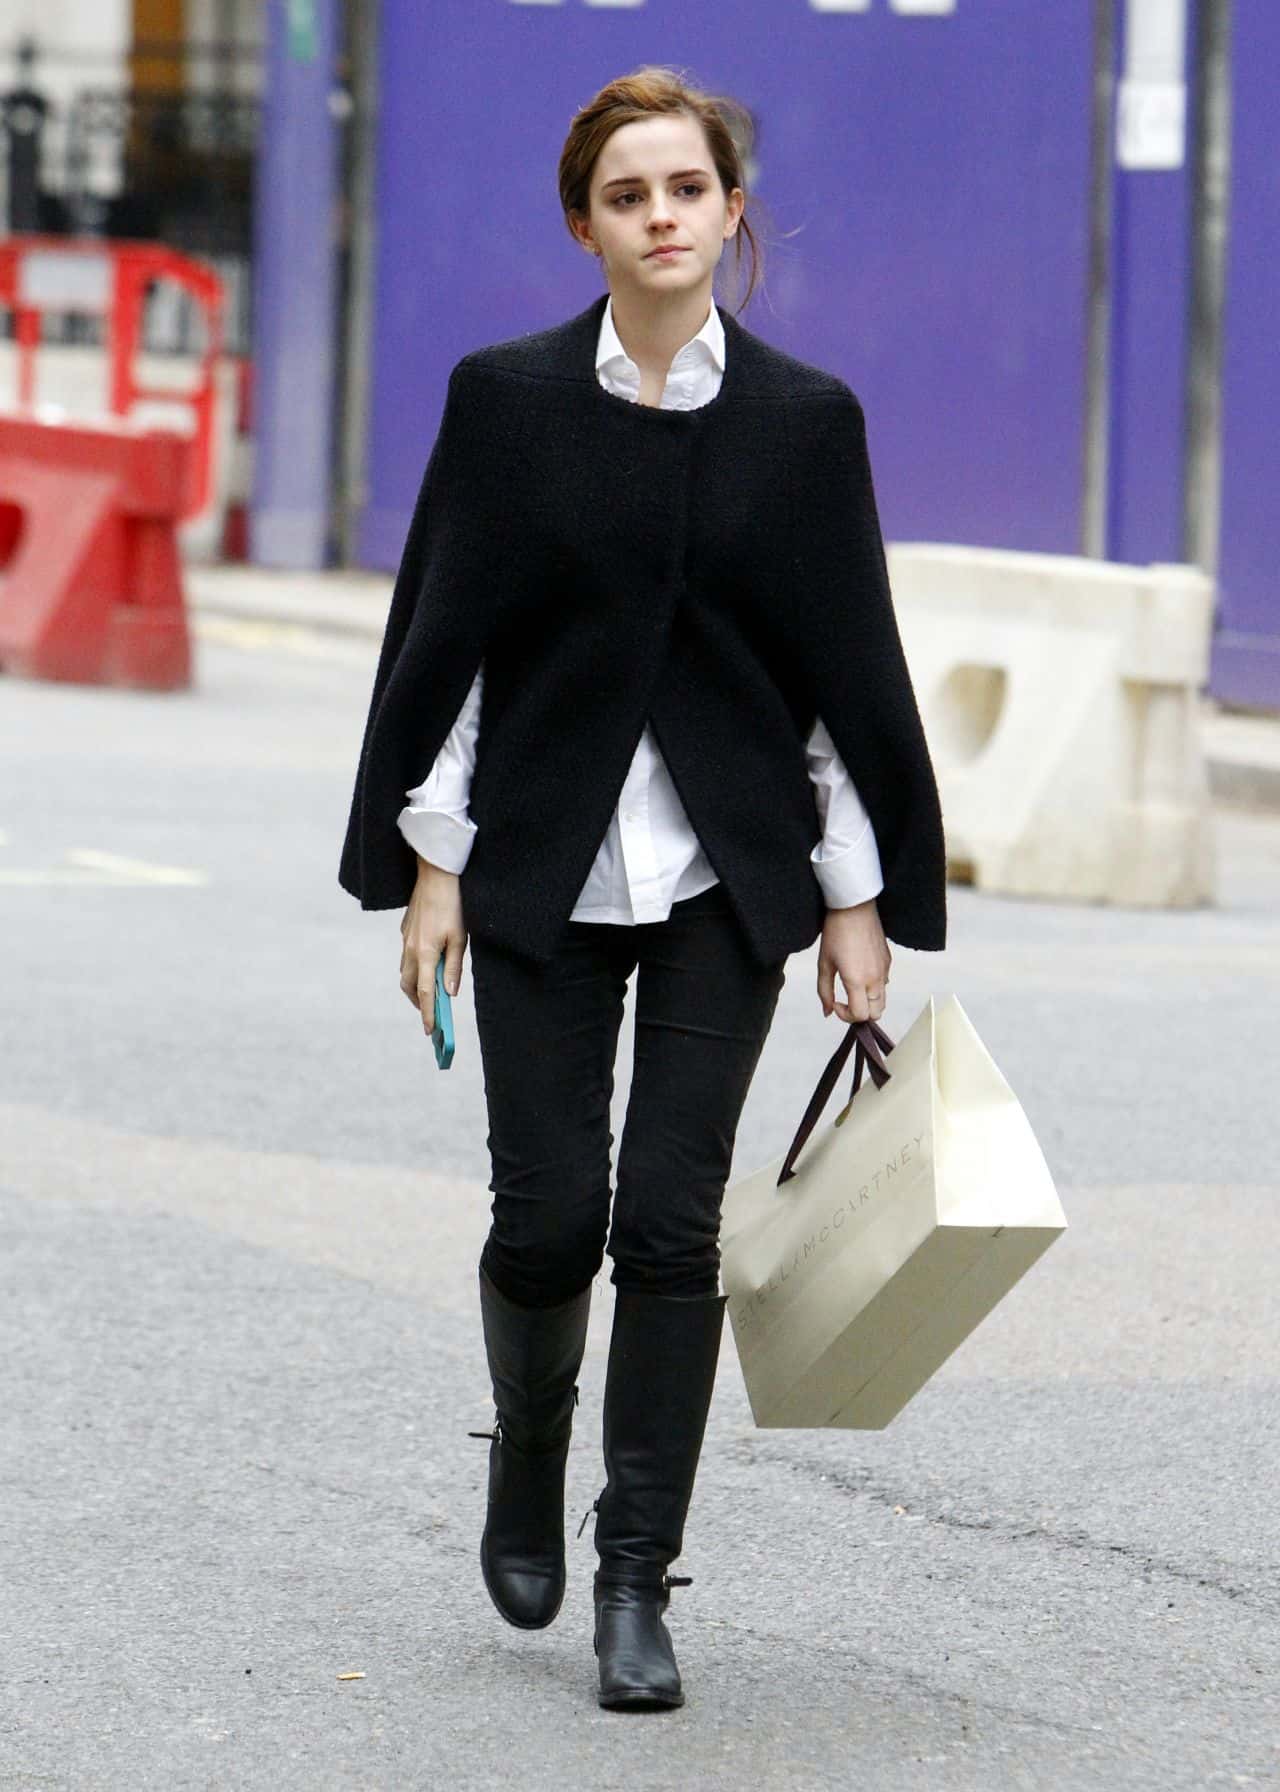 Emma Watson Radiates Confidence and Natural Beauty During Shopping Spree